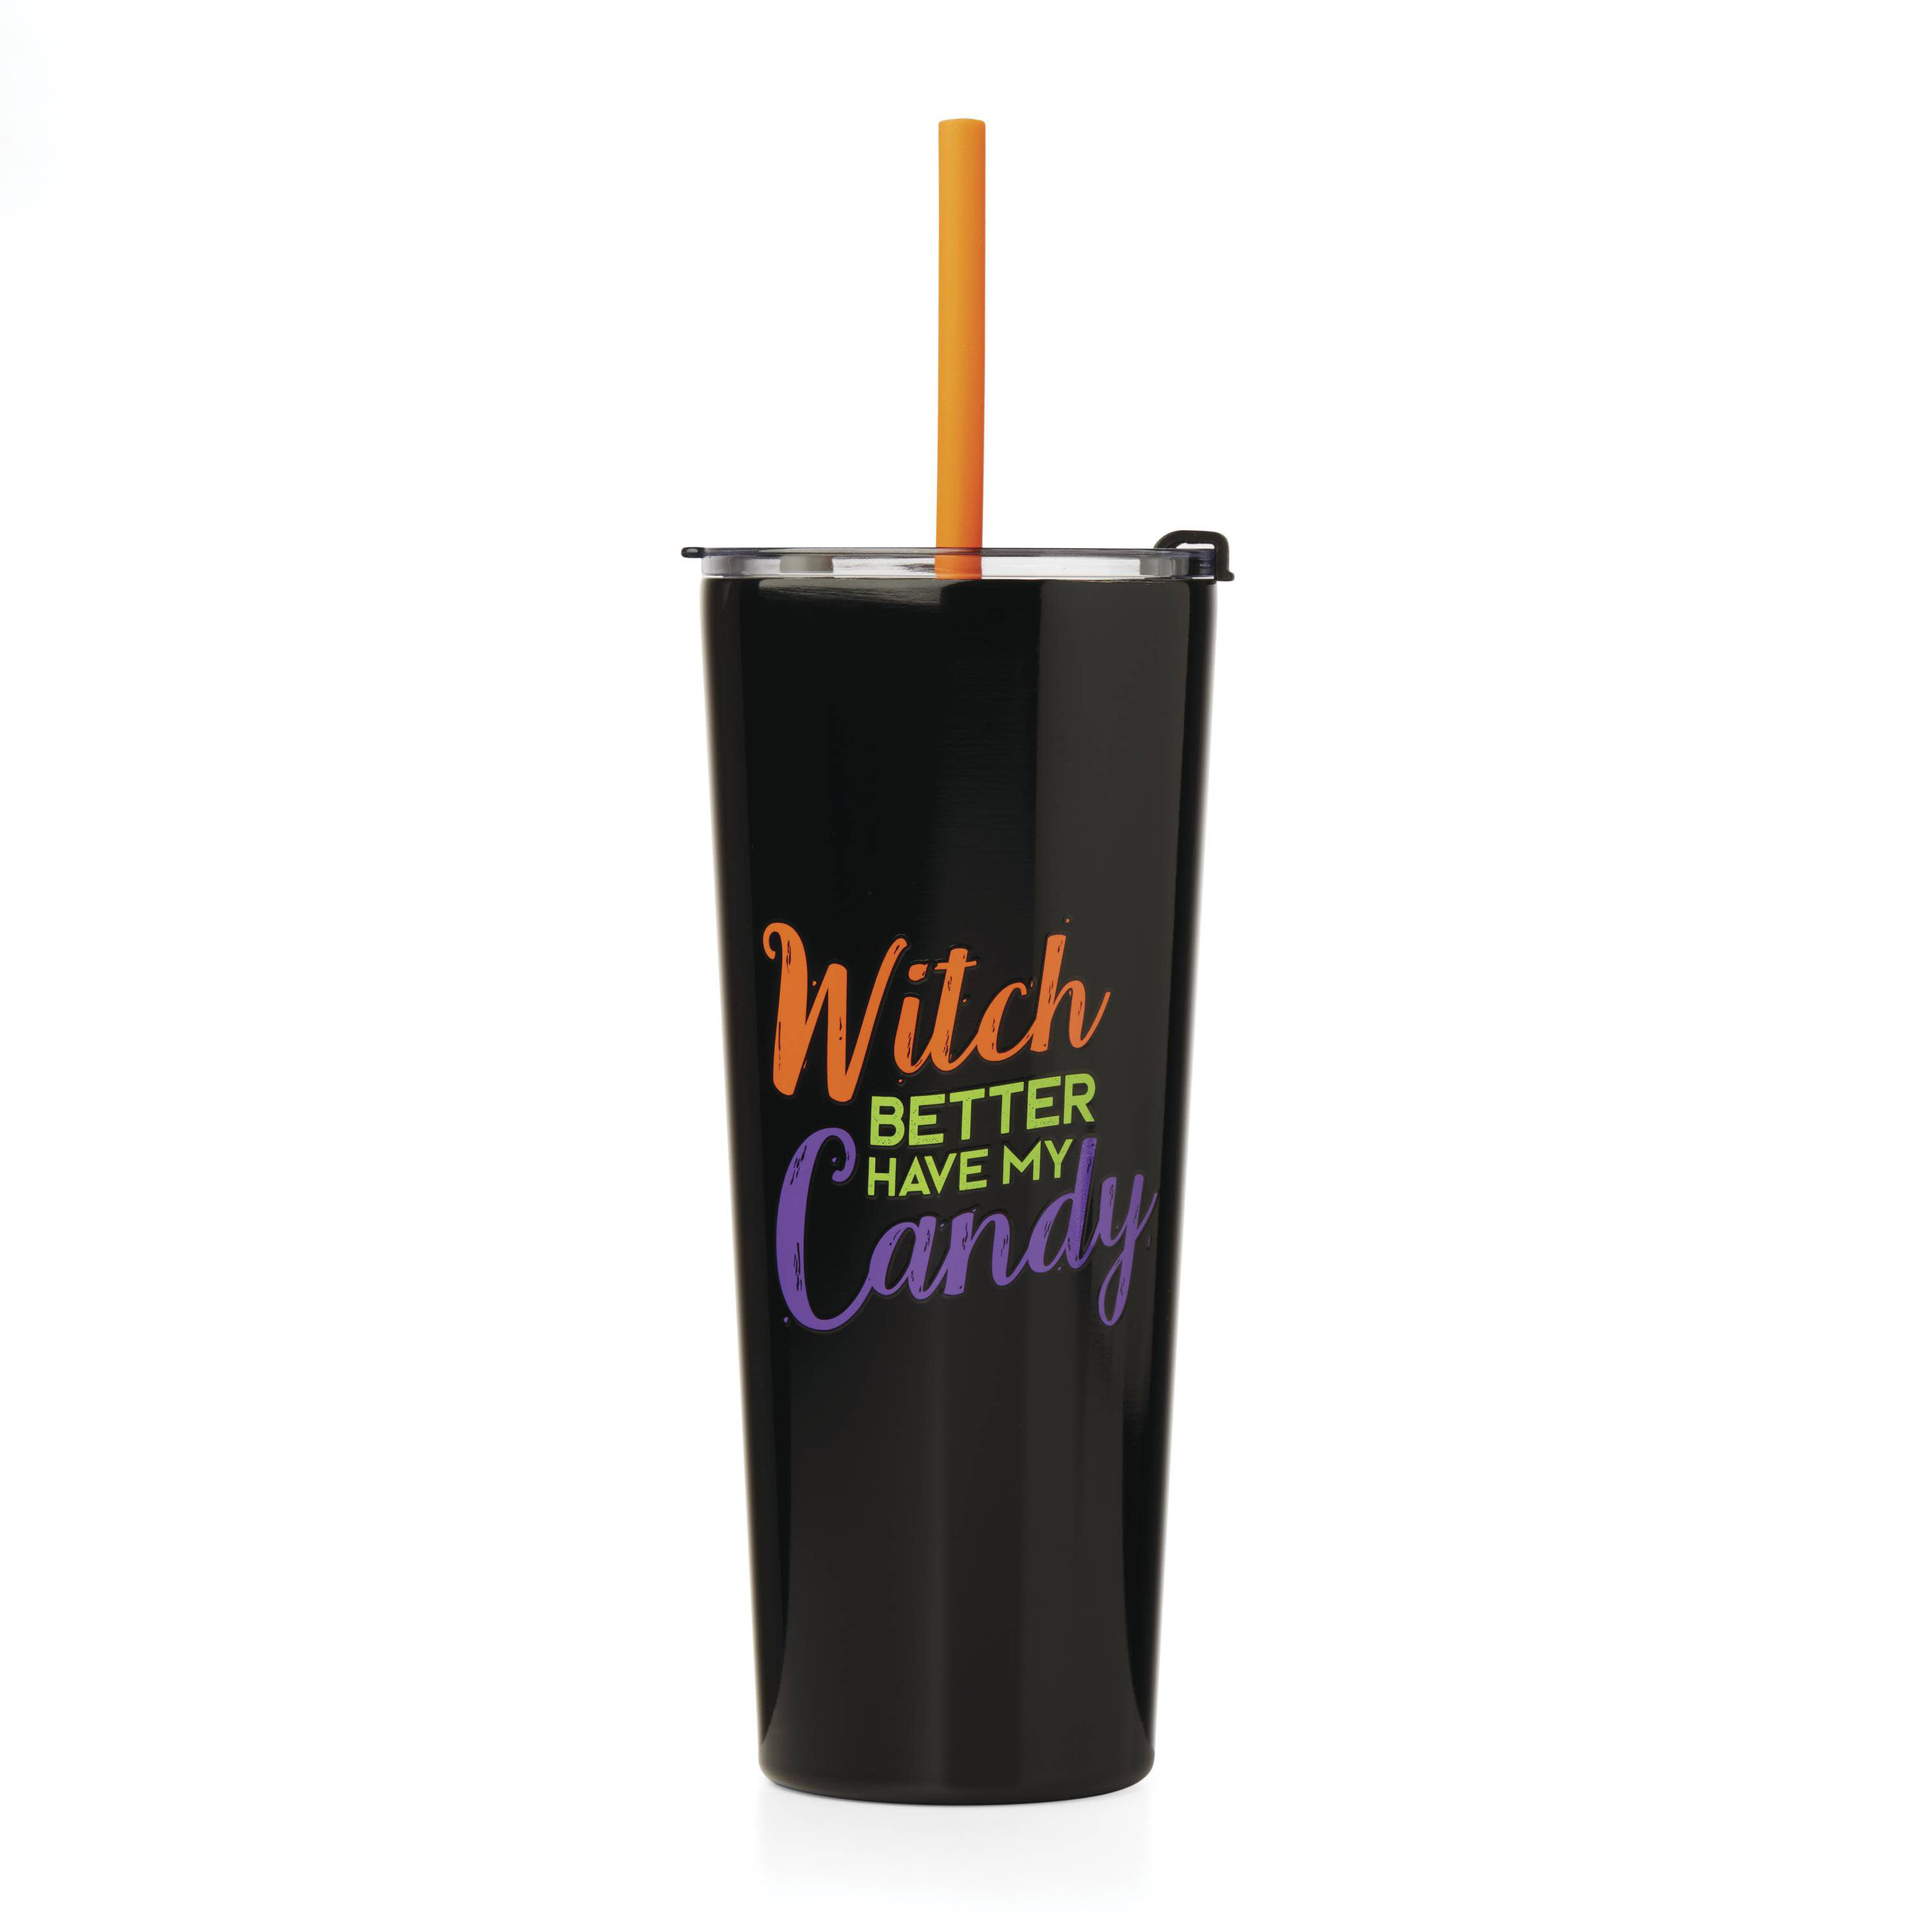 Cambridge Witch Candy 24 Oz Insulated Tumbler With Straw